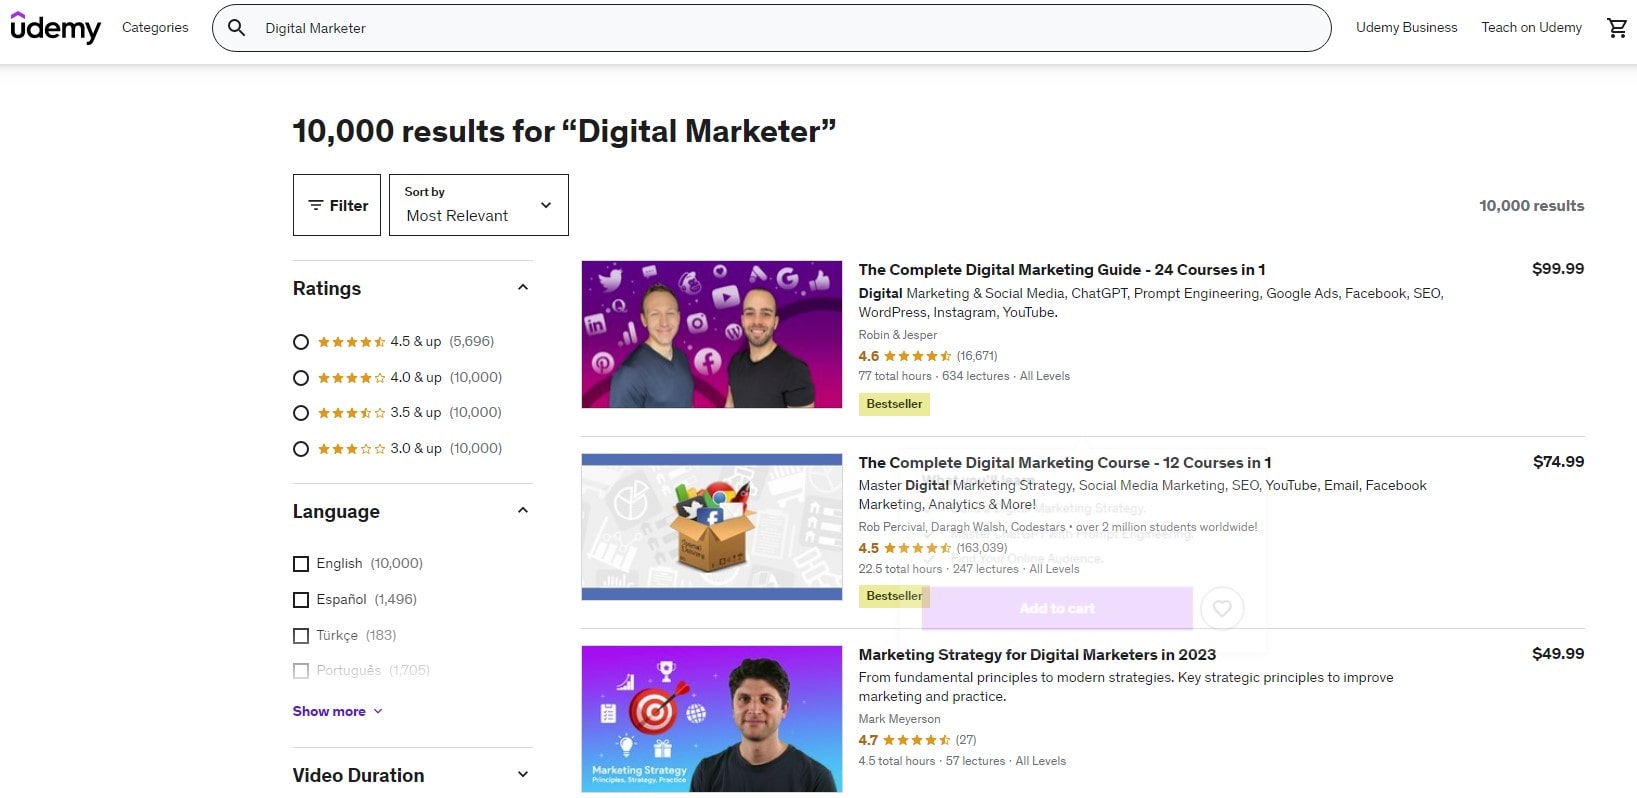 How To Become A Digital Marketer In 2023: 15 Best Tips 13